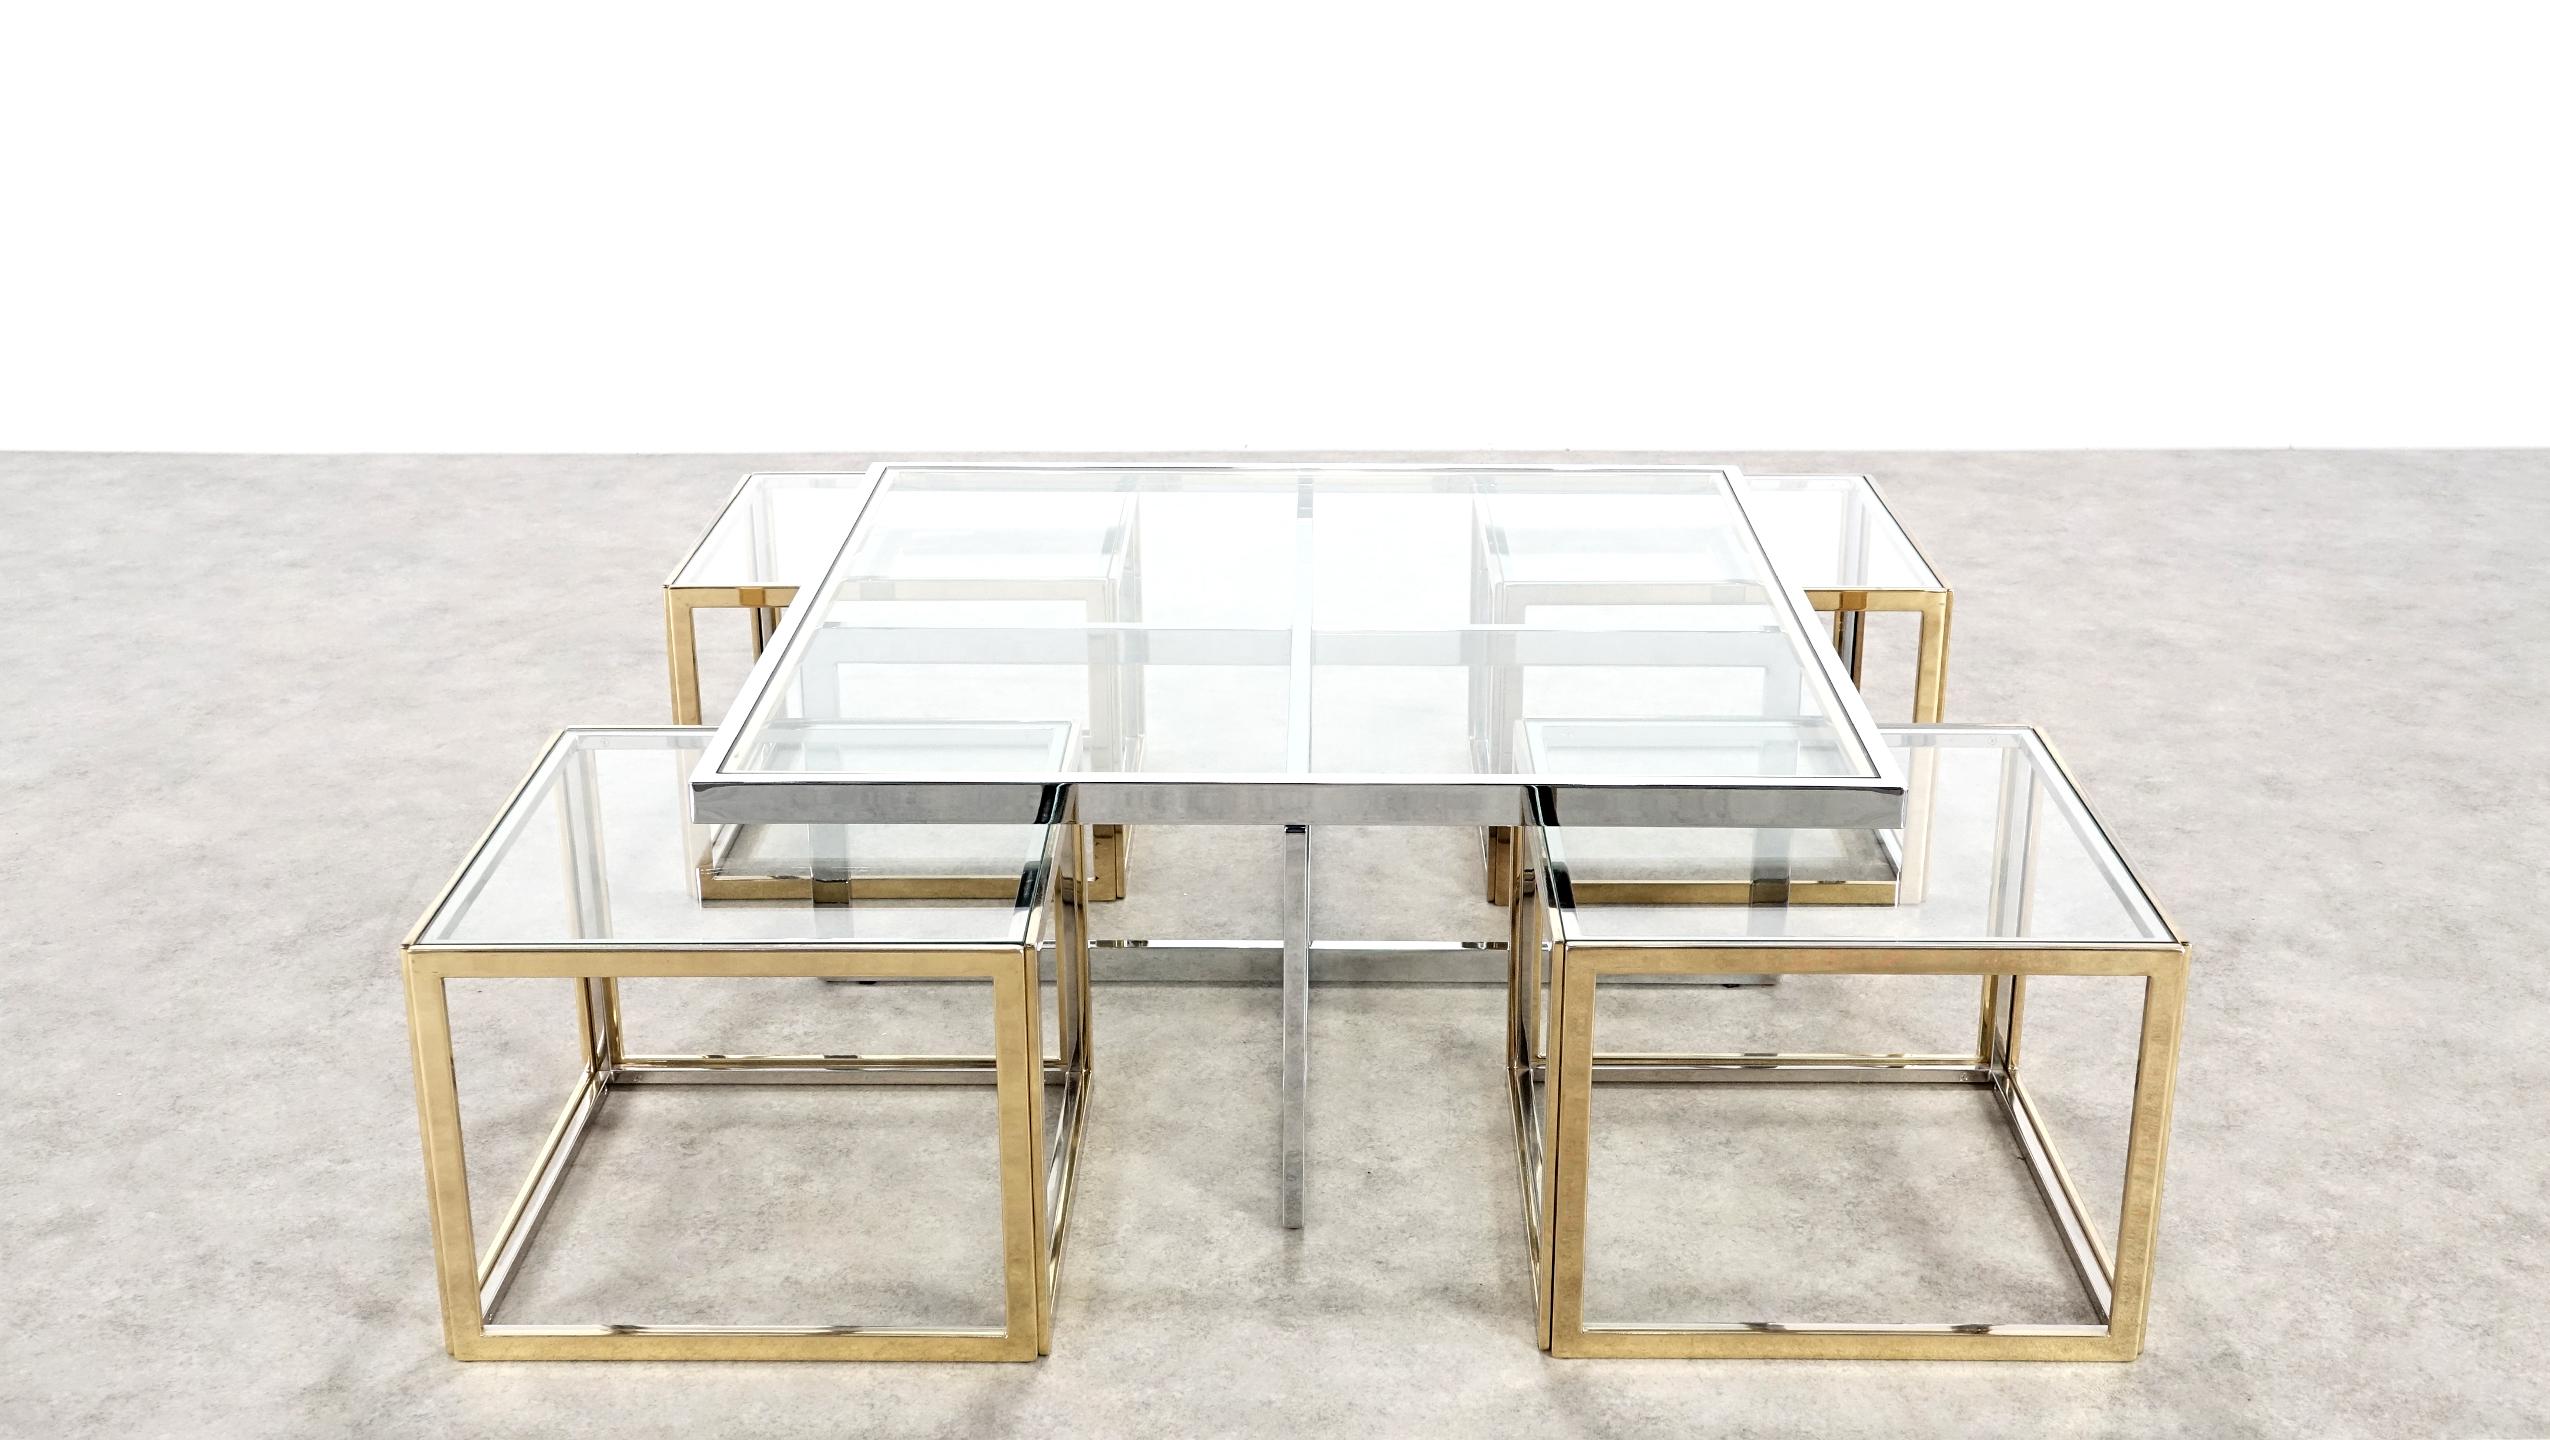 Elegant Maison Charles coffee table with four nesting tables in brass and chrome. 
This set is a real eyecatcher for your interior and for every reception!

The glass are in good condition.